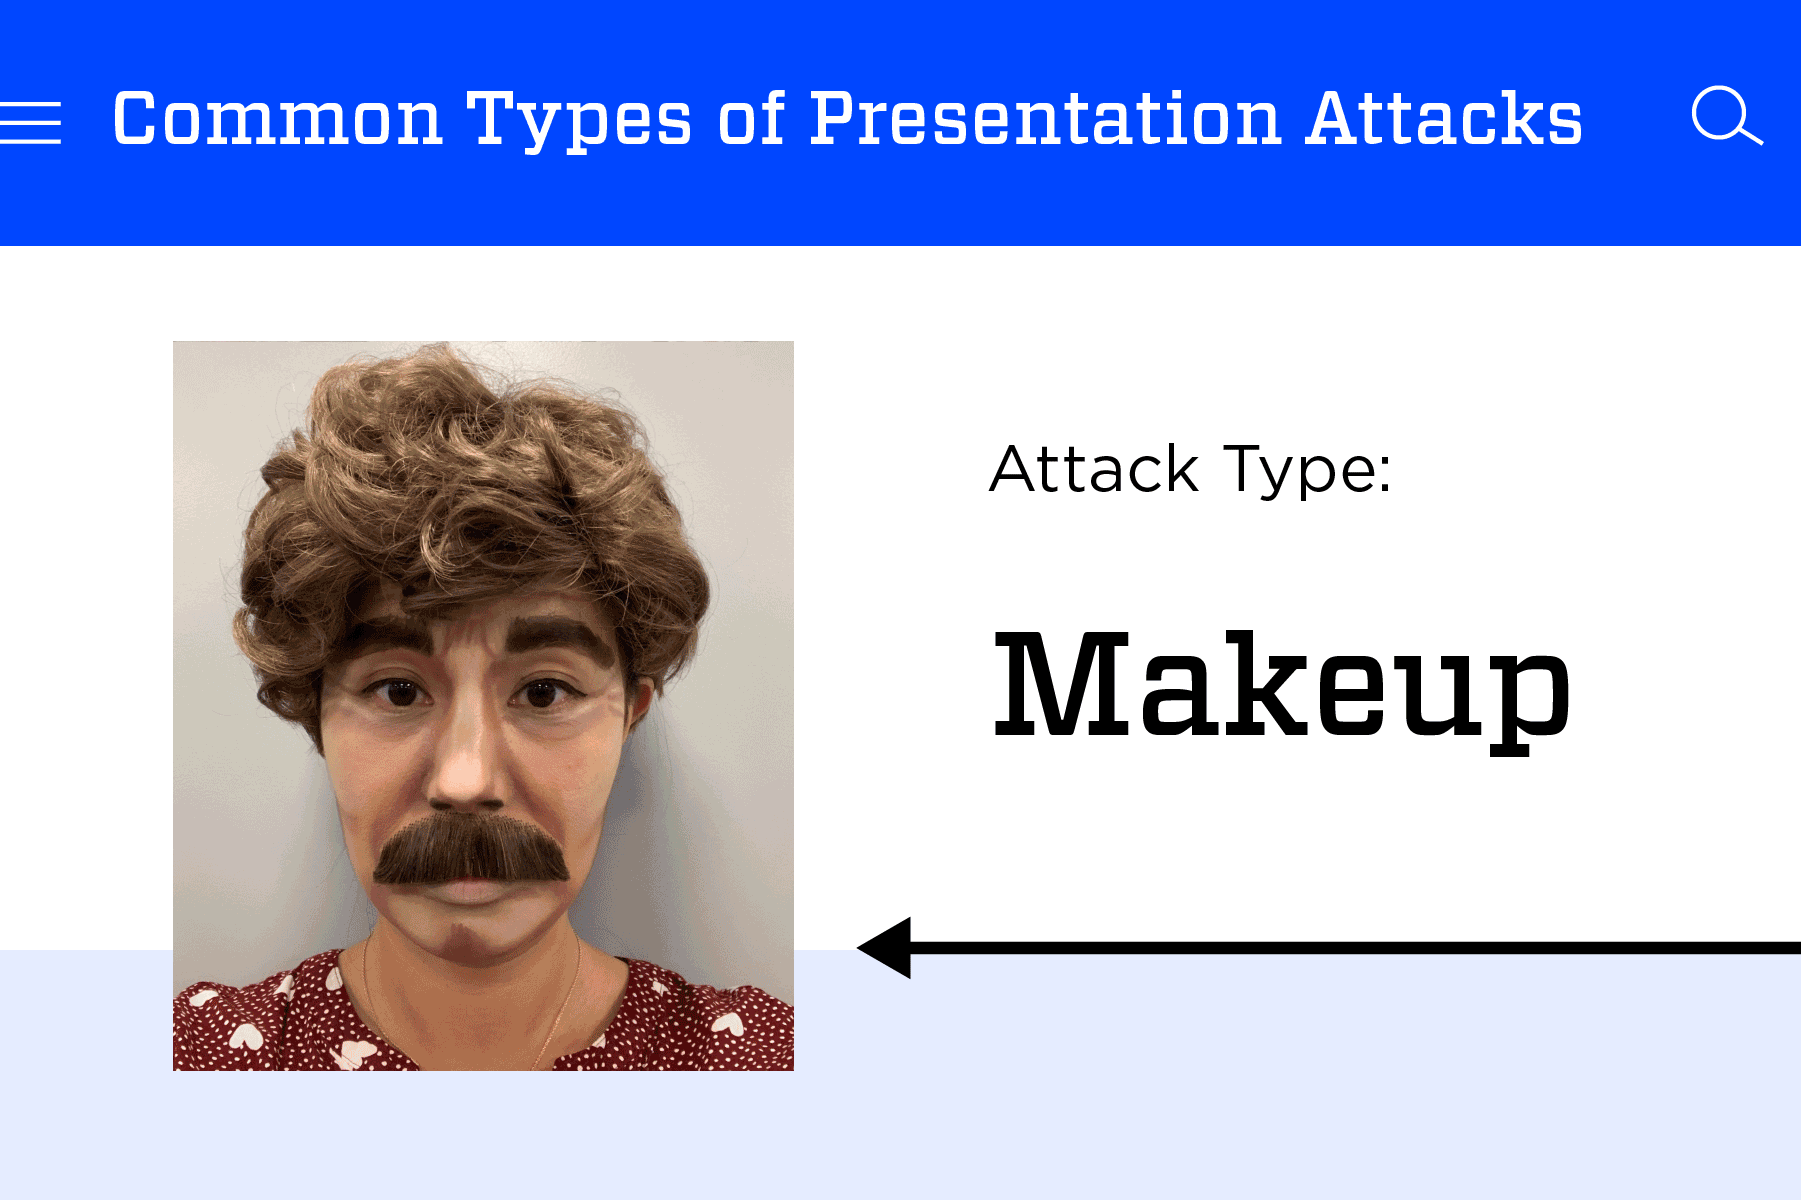 Three rotating images show types of presentation attacks: a person in heavy appearance-altering makeup, a person holding up a printed photo of another person, and a hand holding up a phone image of another person.